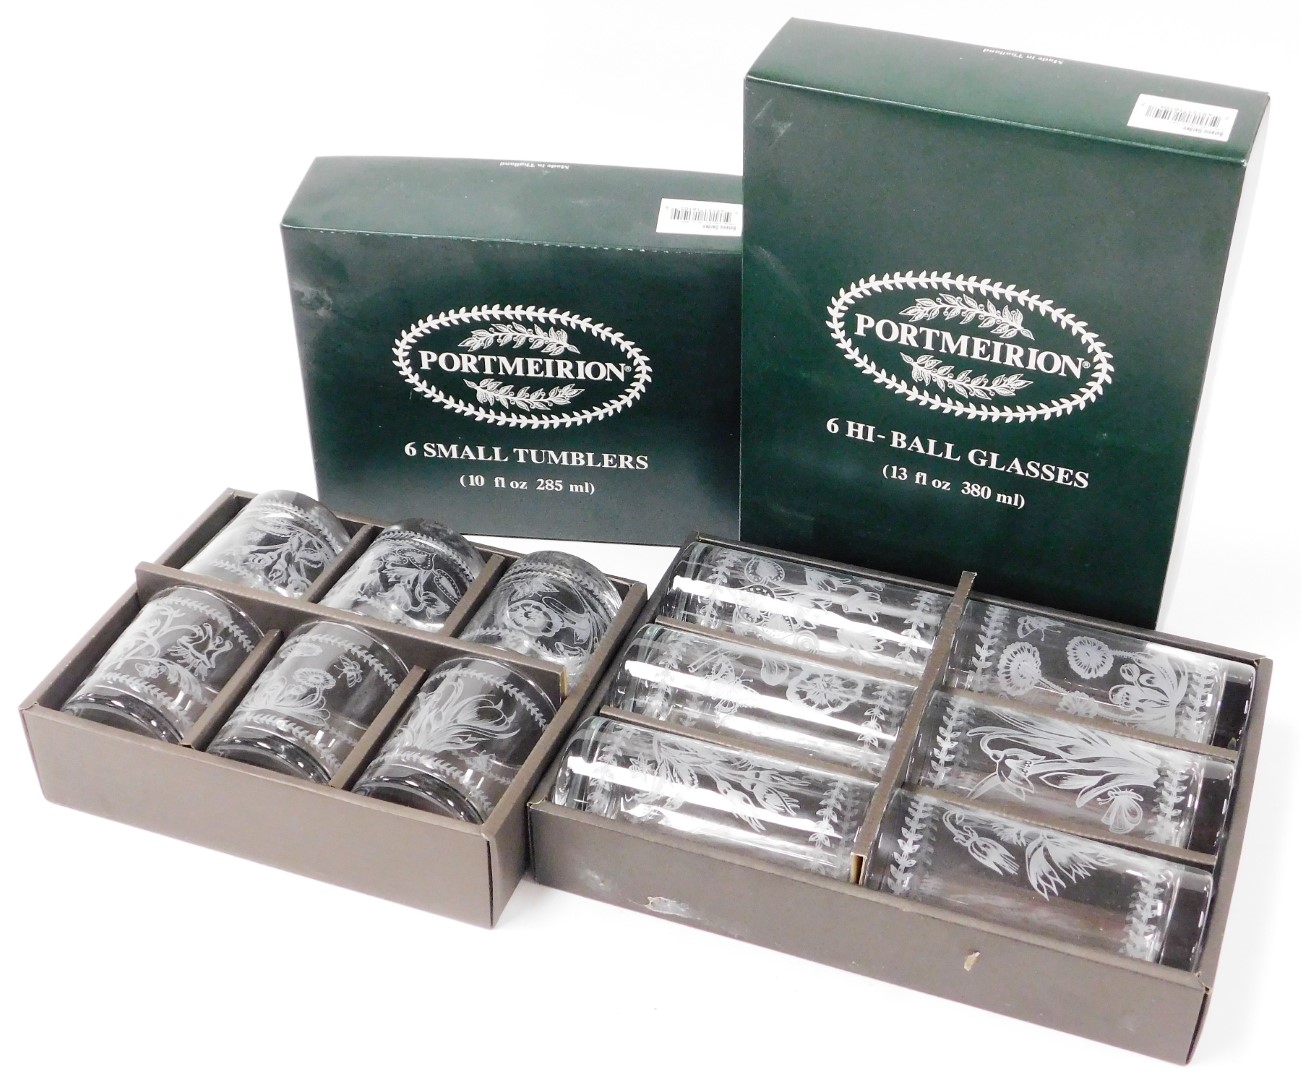 Two sets of Portmeirion glasses, to include six small tumblers and six highball glasses, each boxed.